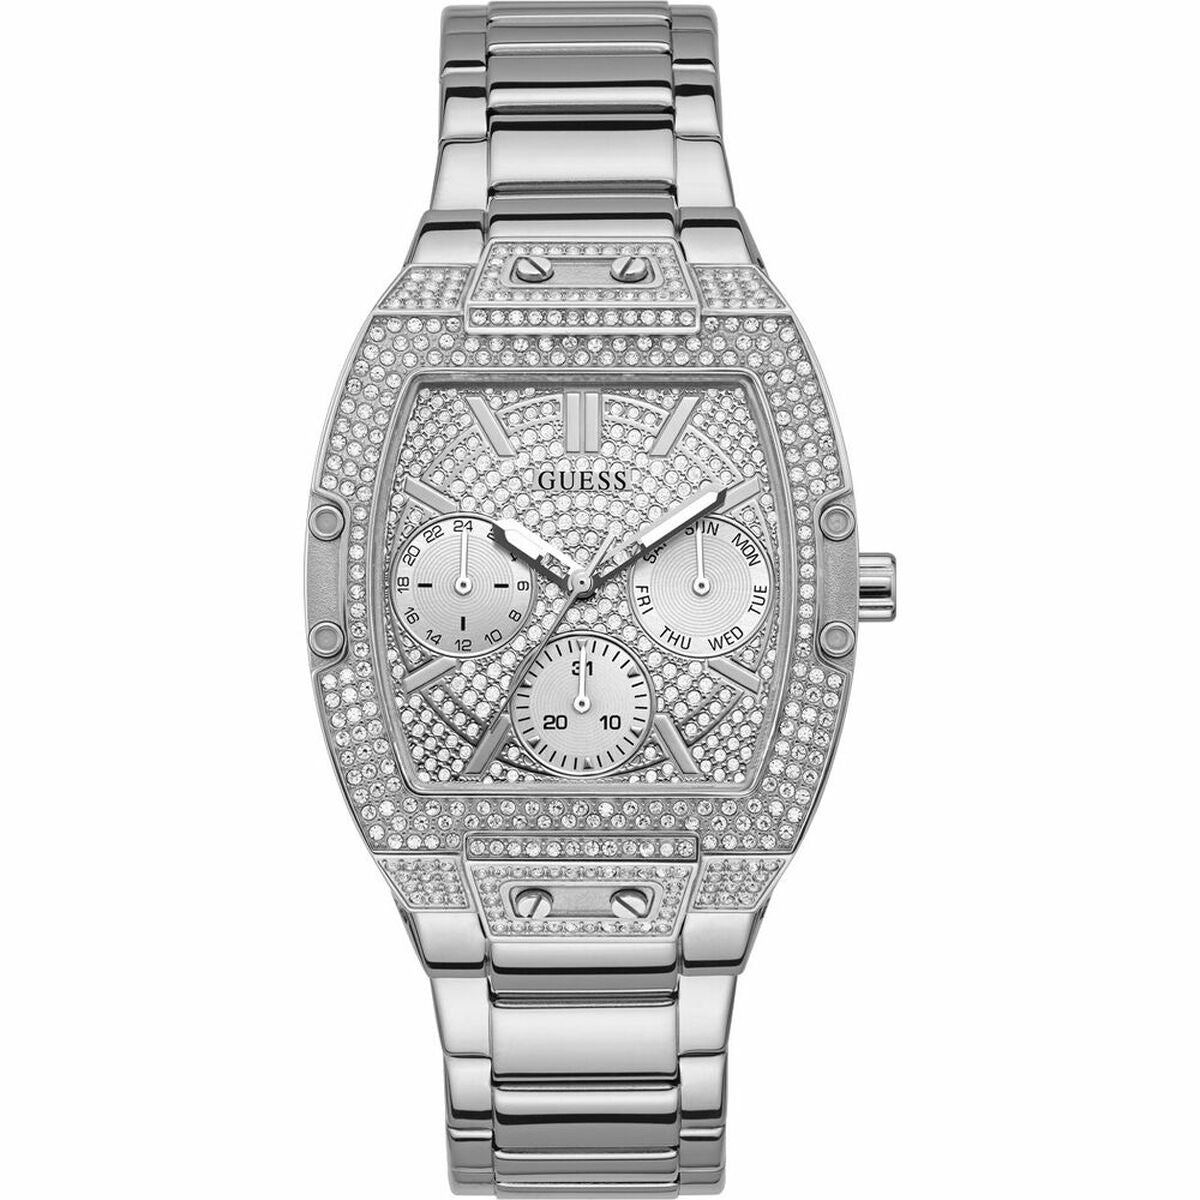 Ladies' Watch Guess GW0104L1 (Ø 38 mm), Guess, Watches, Women, ladies-watch-guess-gw0104l1-o-38-mm, Brand_Guess, category-reference-2570, category-reference-2635, category-reference-2995, category-reference-t-19667, category-reference-t-19725, Condition_NEW, fashion, gifts for women, original gifts, Price_100 - 200, RiotNook